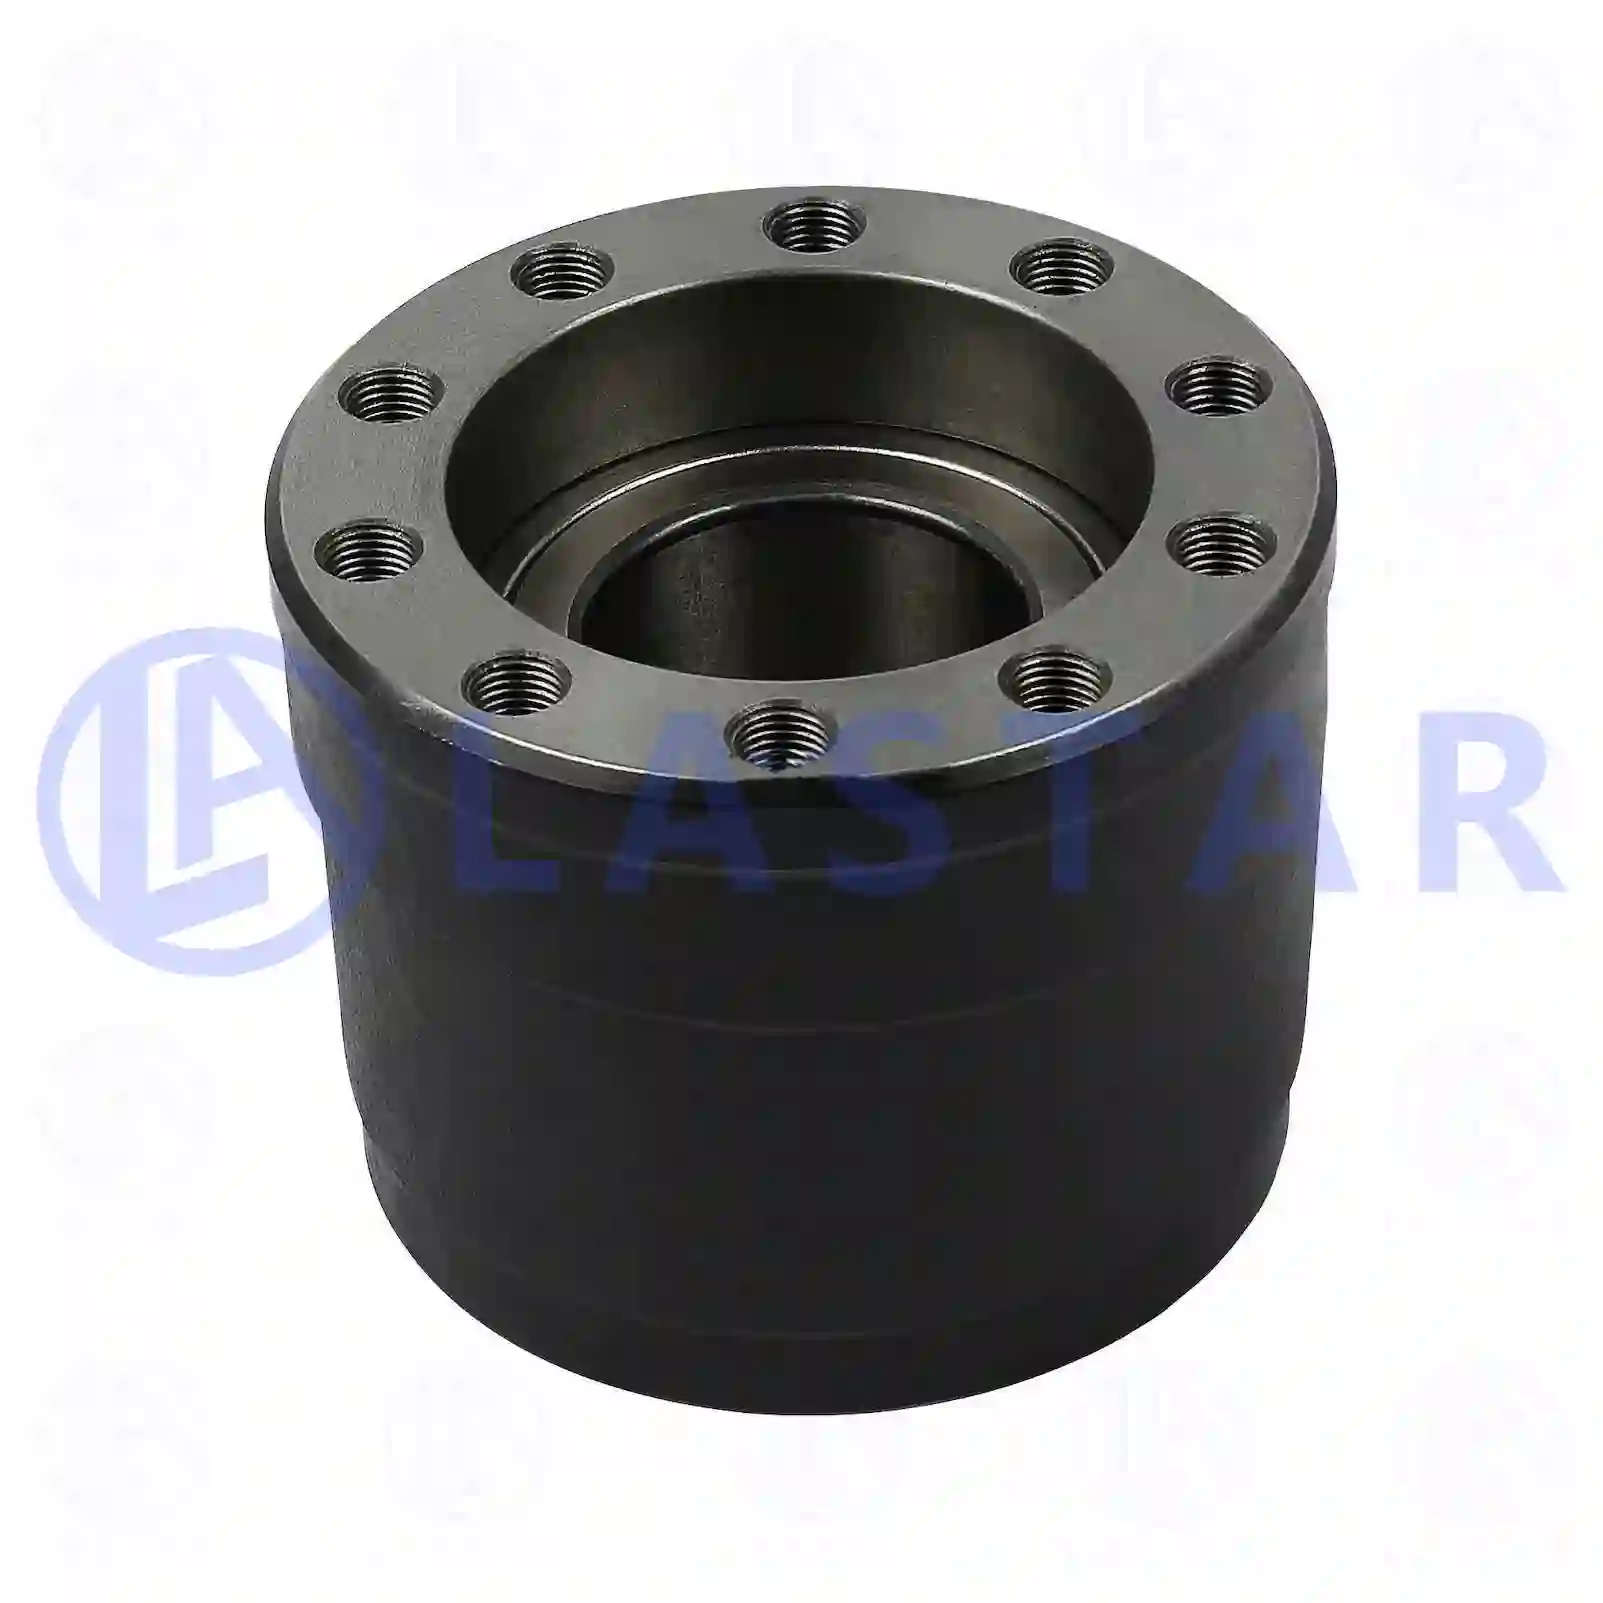 Wheel hub, with bearing, without ABS ring, 77726350, 9723300125, 9723300225, 9723300325, 9723300425, 9723300525, 9723300625, ZG30217-0008 ||  77726350 Lastar Spare Part | Truck Spare Parts, Auotomotive Spare Parts Wheel hub, with bearing, without ABS ring, 77726350, 9723300125, 9723300225, 9723300325, 9723300425, 9723300525, 9723300625, ZG30217-0008 ||  77726350 Lastar Spare Part | Truck Spare Parts, Auotomotive Spare Parts